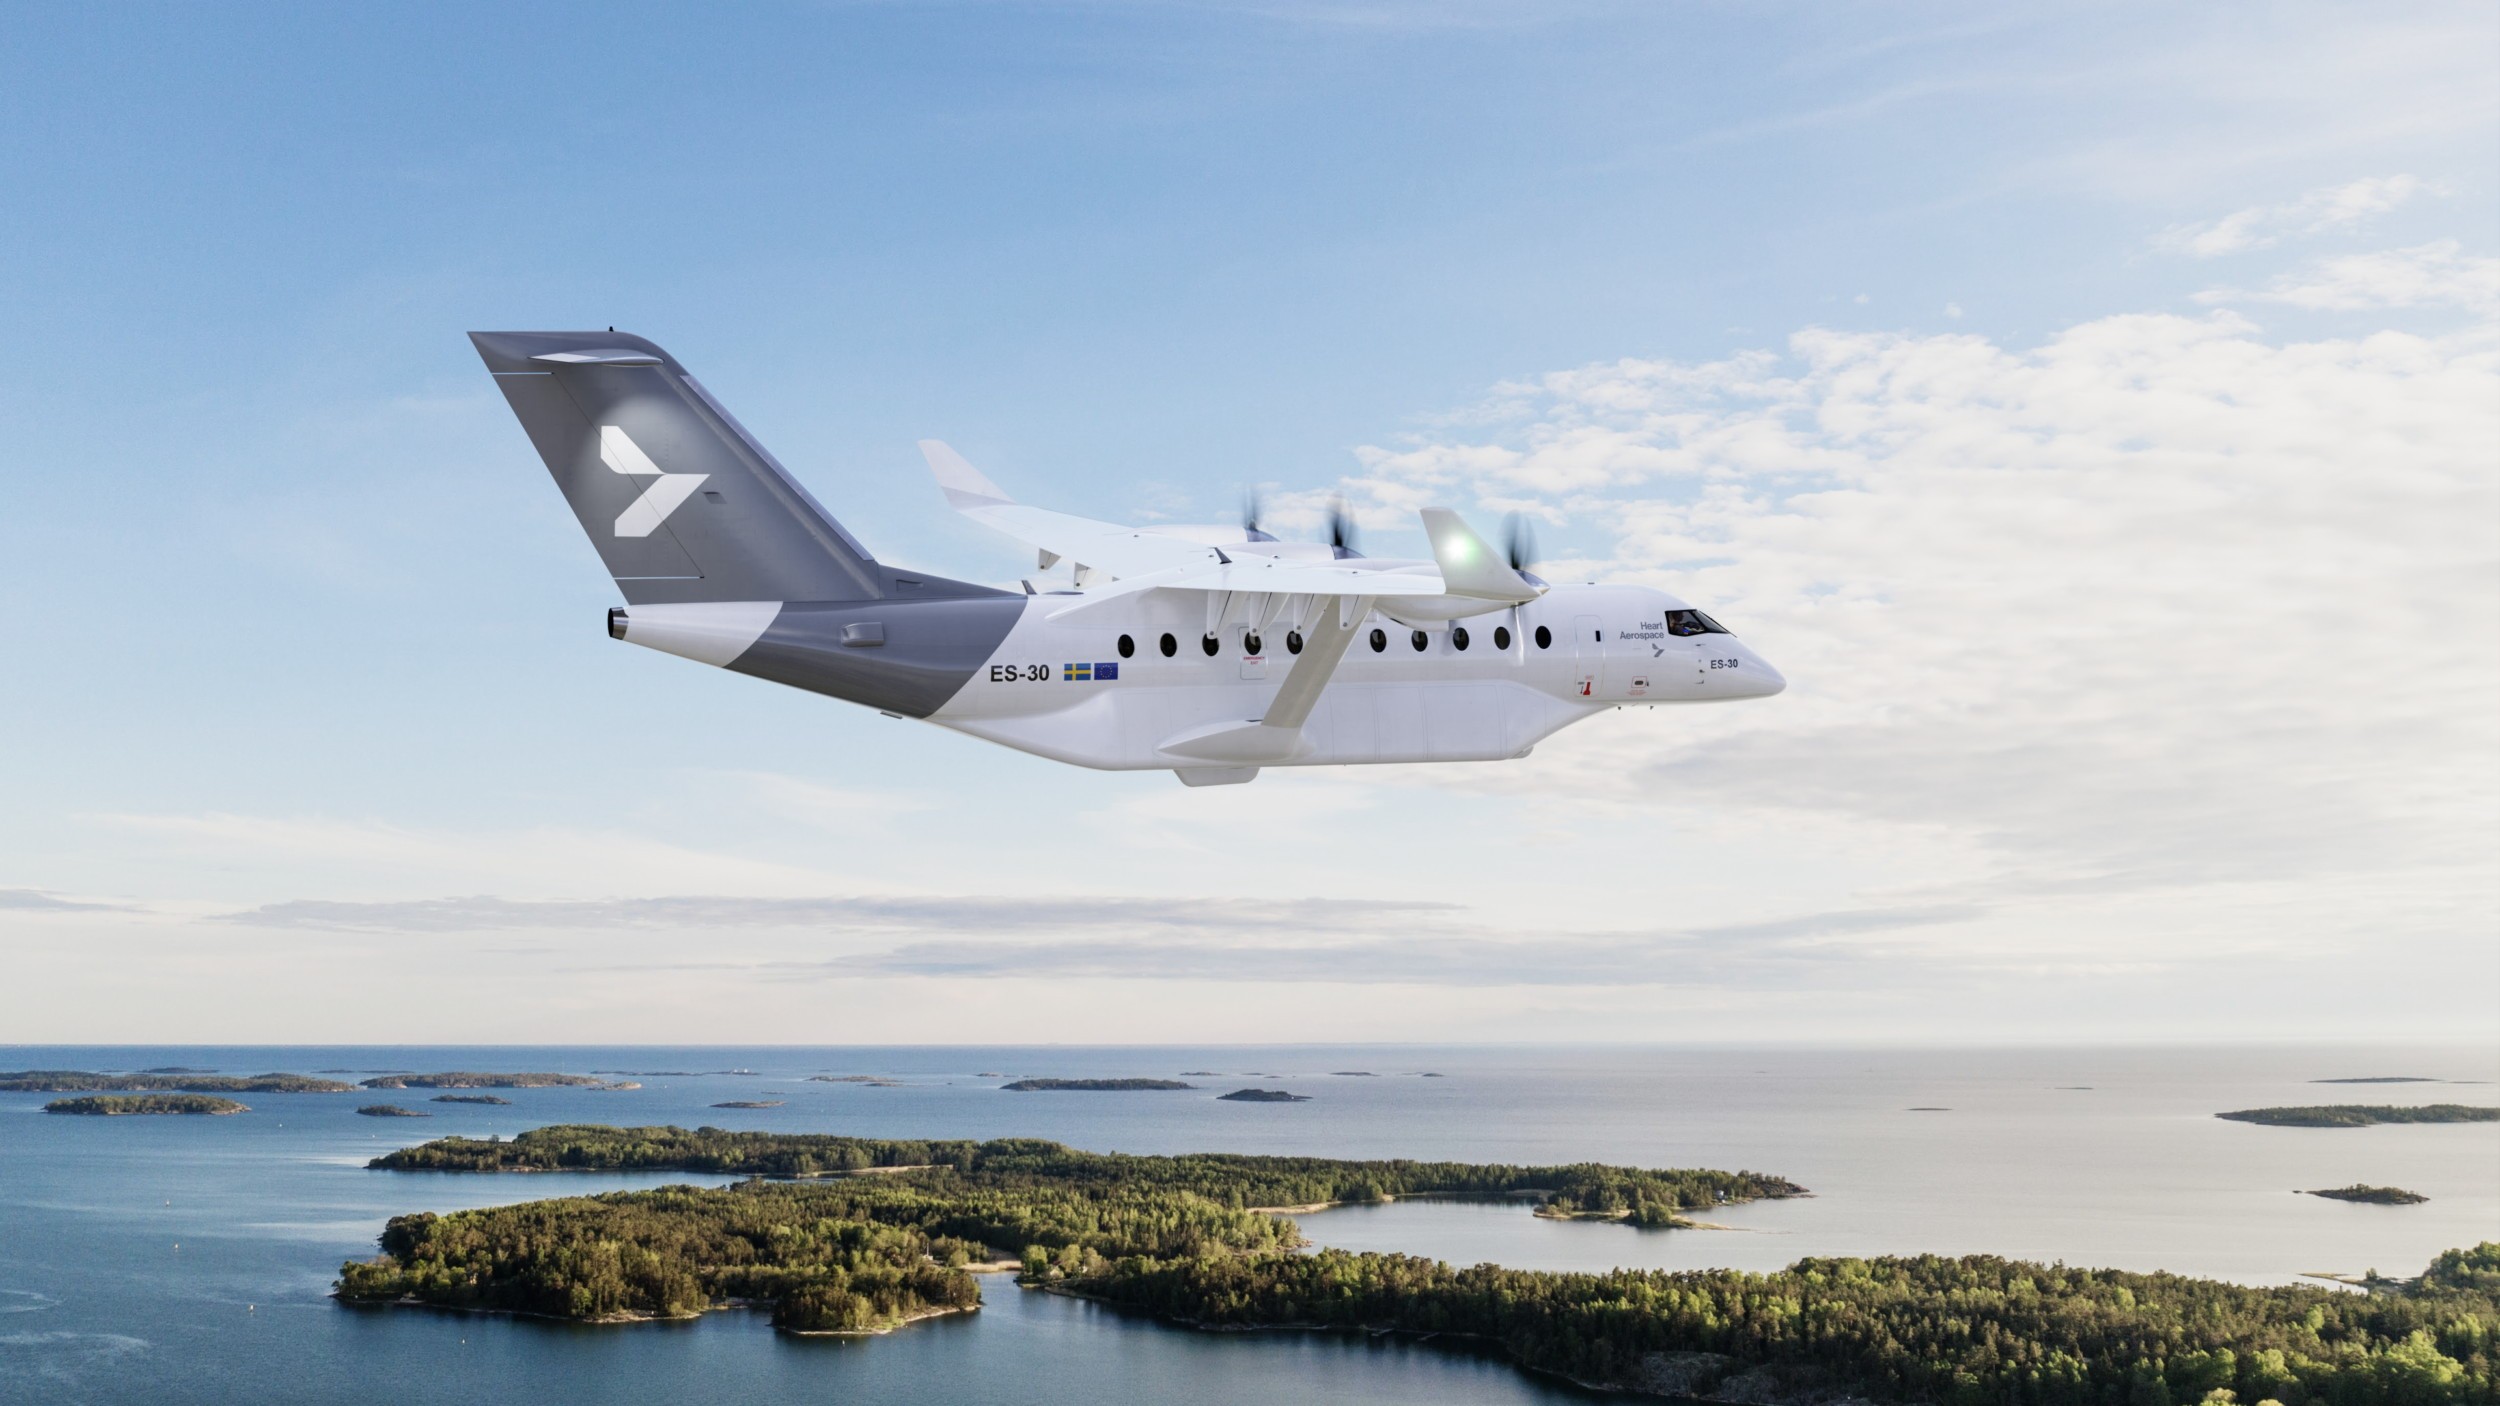 An Island Community Chose This 30-Seat Electric Aircraft for